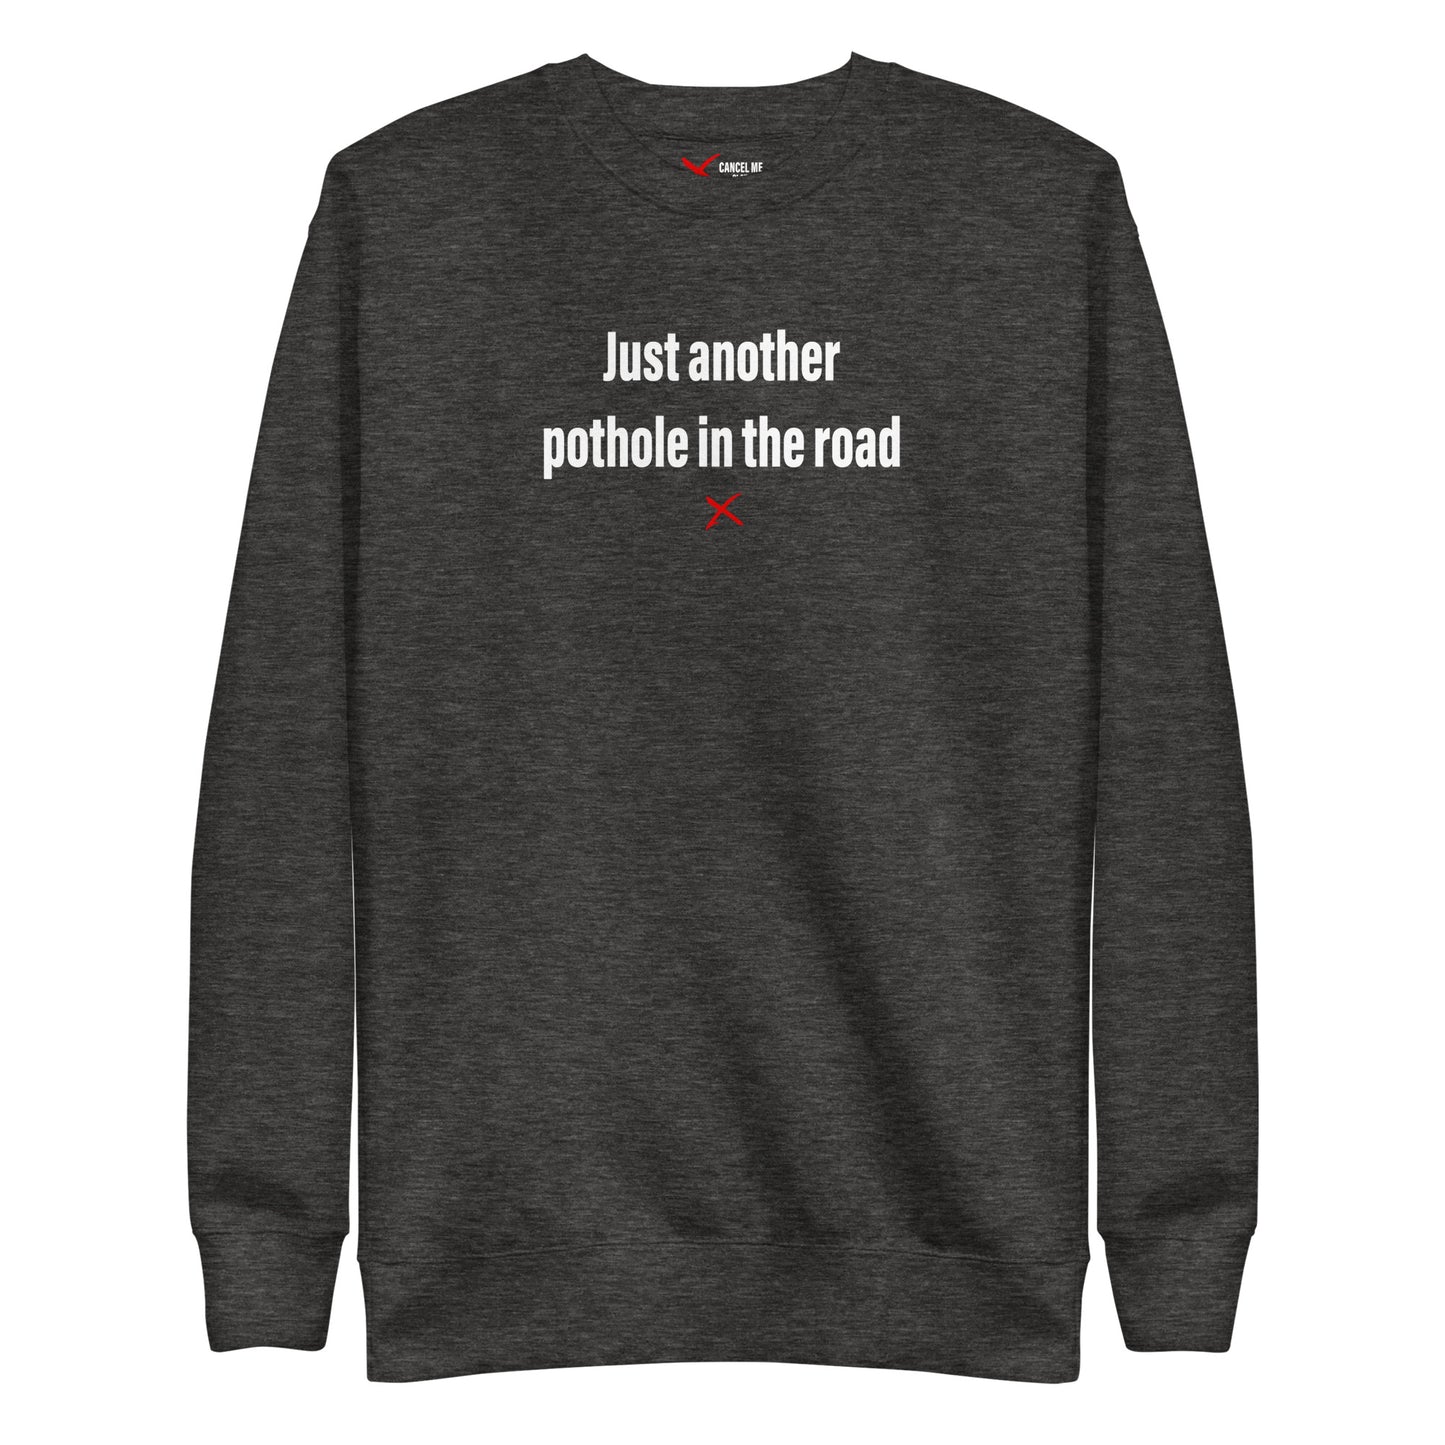 Just another pothole in the road - Sweatshirt